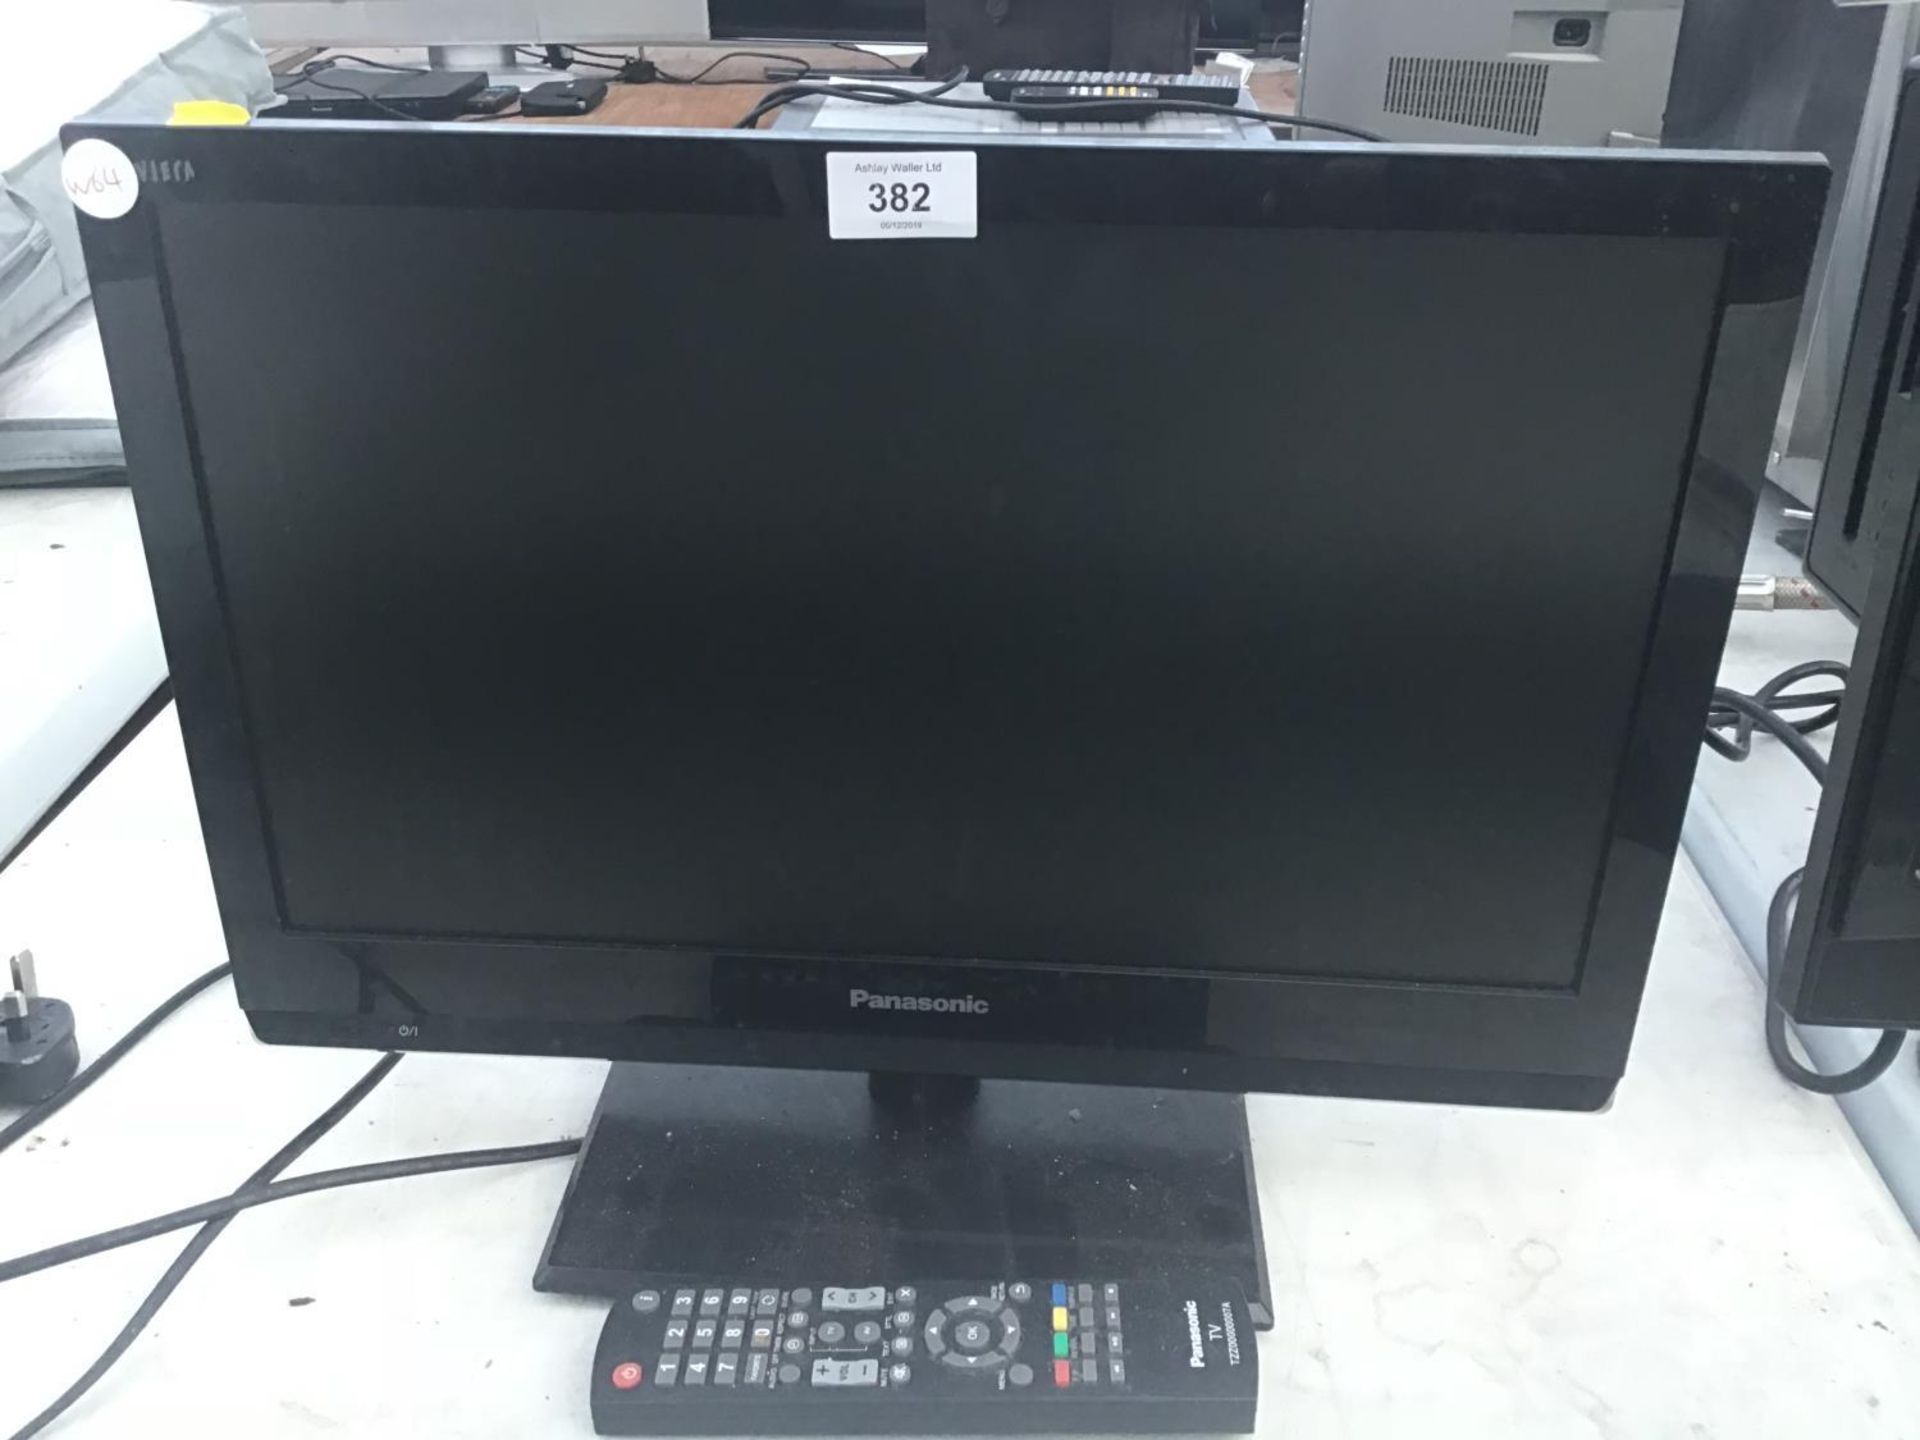 A PANASONIC 19 INCH TELEVISION WITH REMOTE CONTROL IN WORKING ORDER